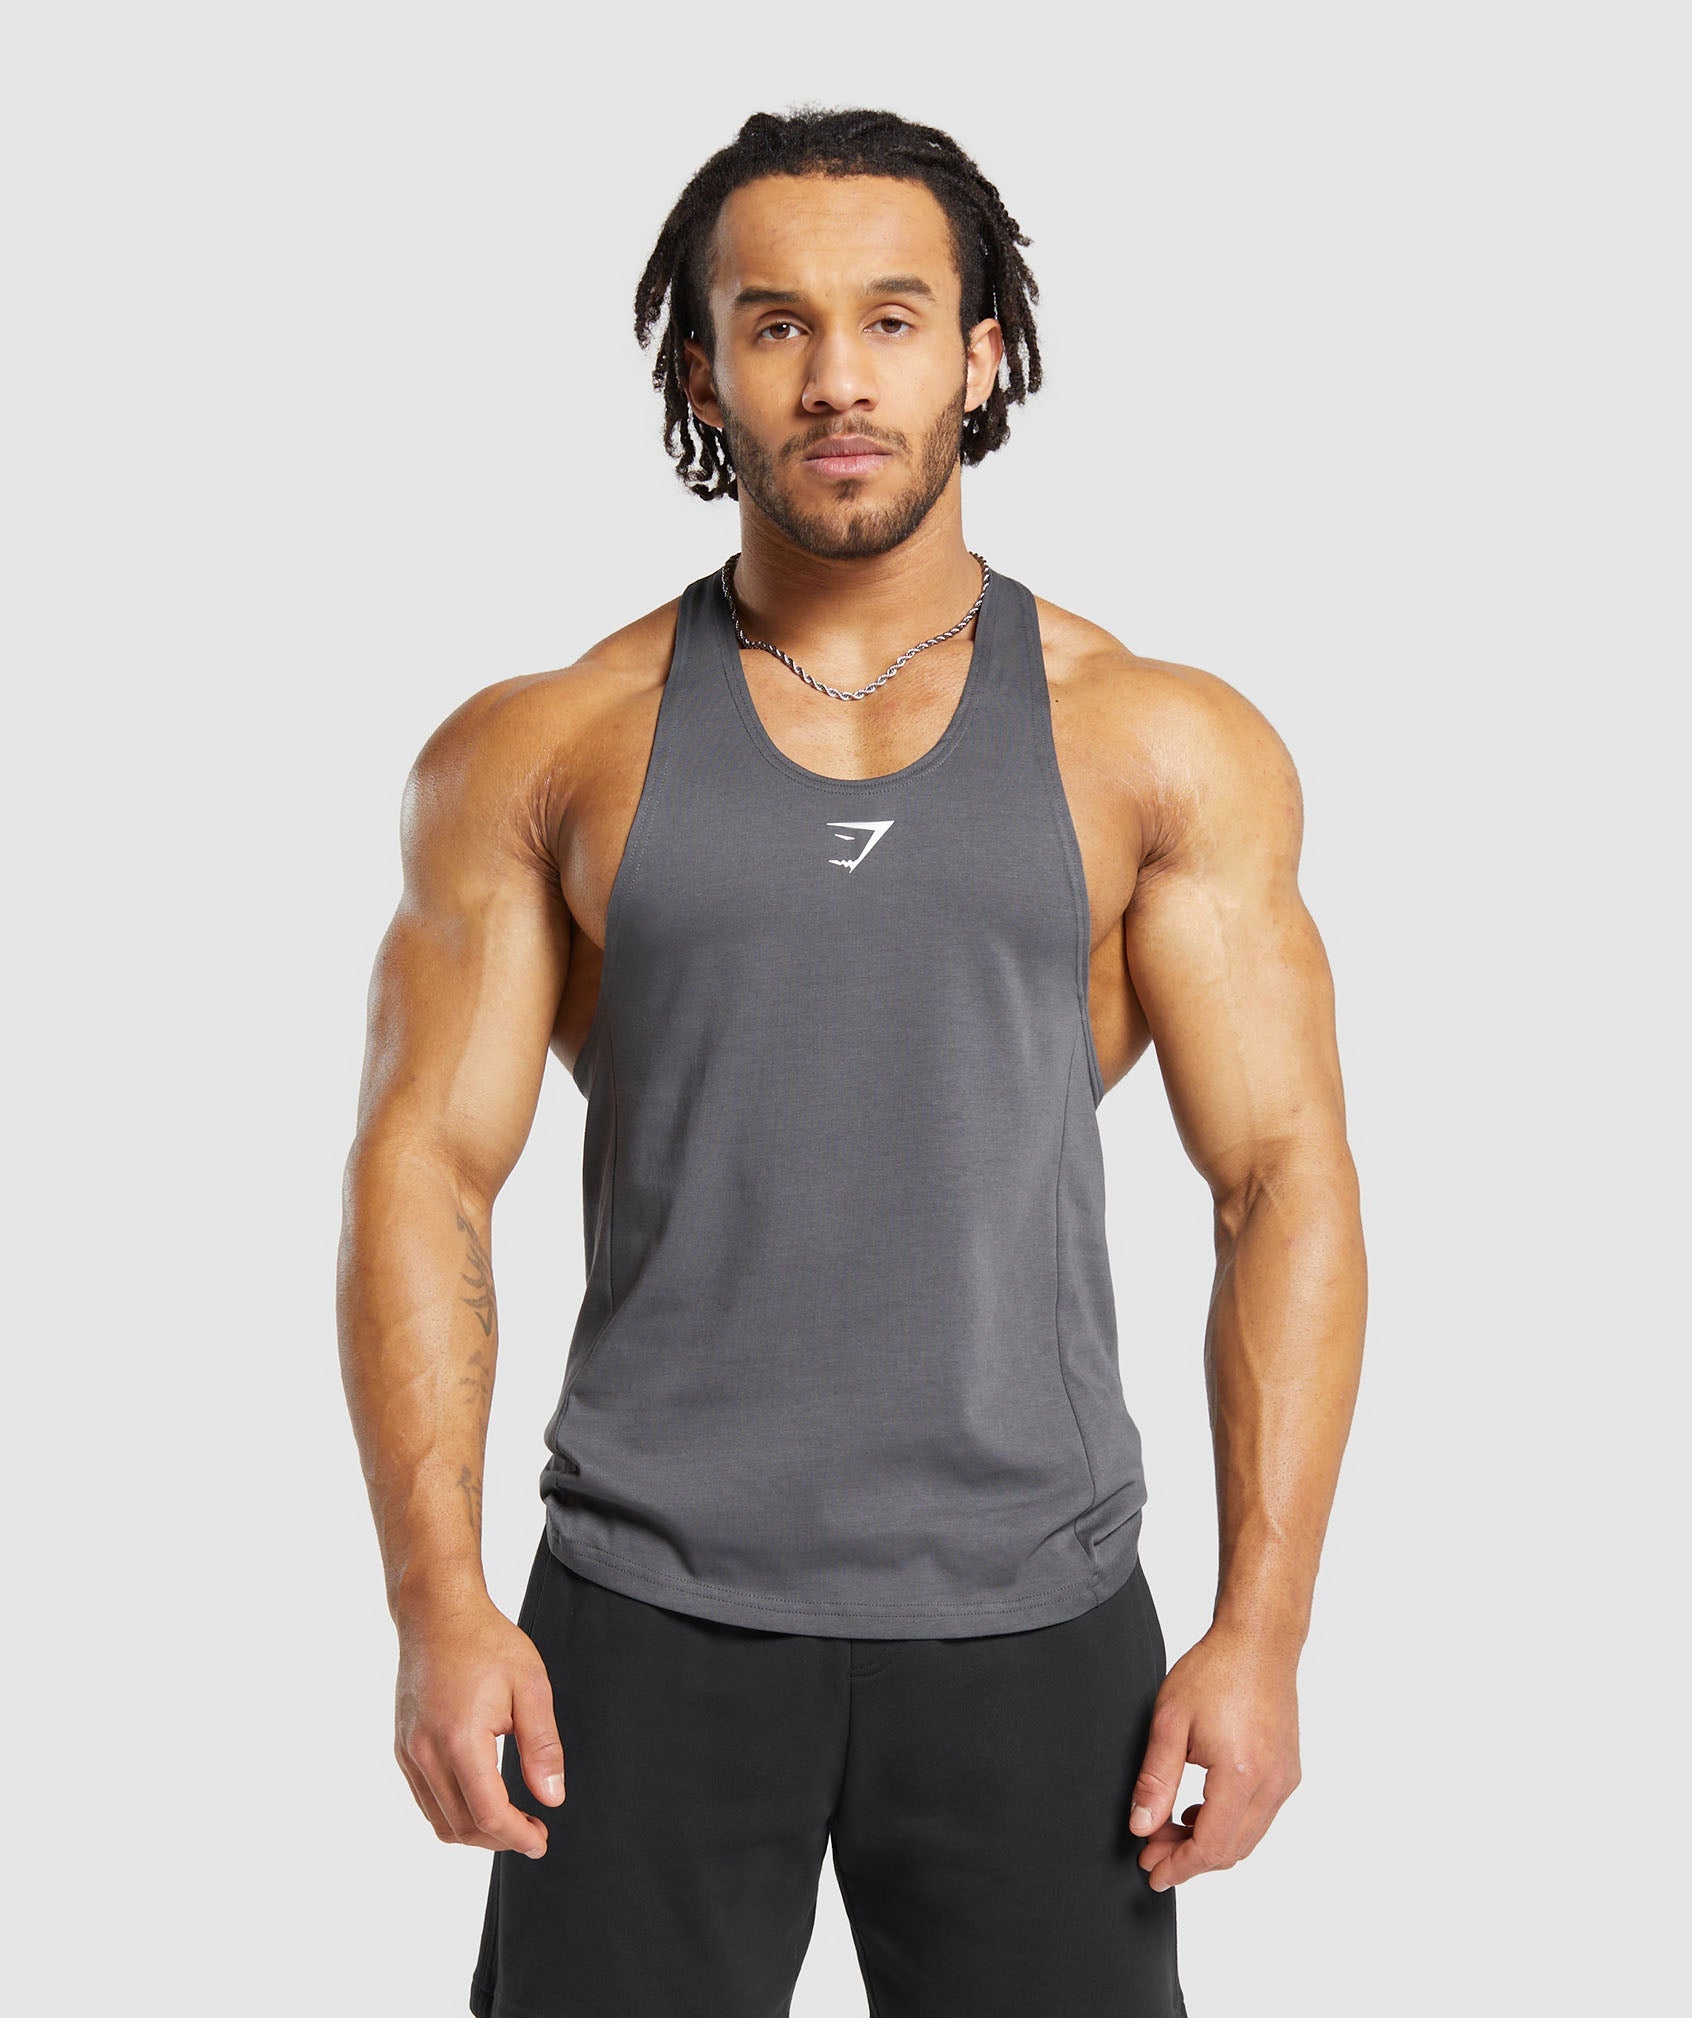 React Stringer in Dark Grey is out of stock